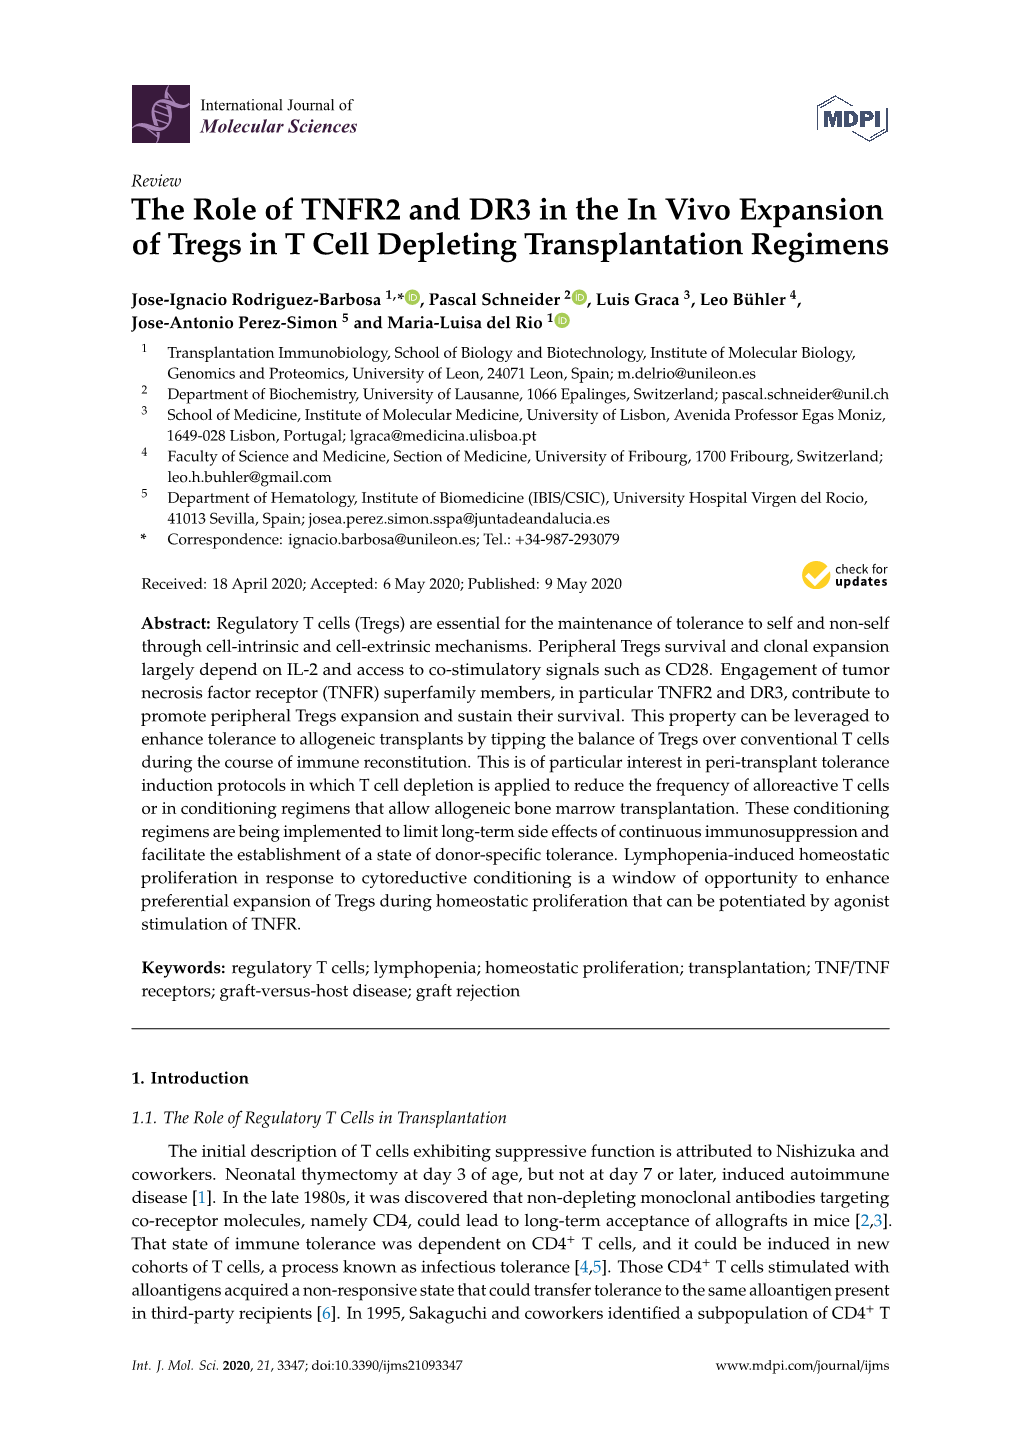 The Role of TNFR2 and DR3 in the in Vivo Expansion of Tregs in T Cell Depleting Transplantation Regimens